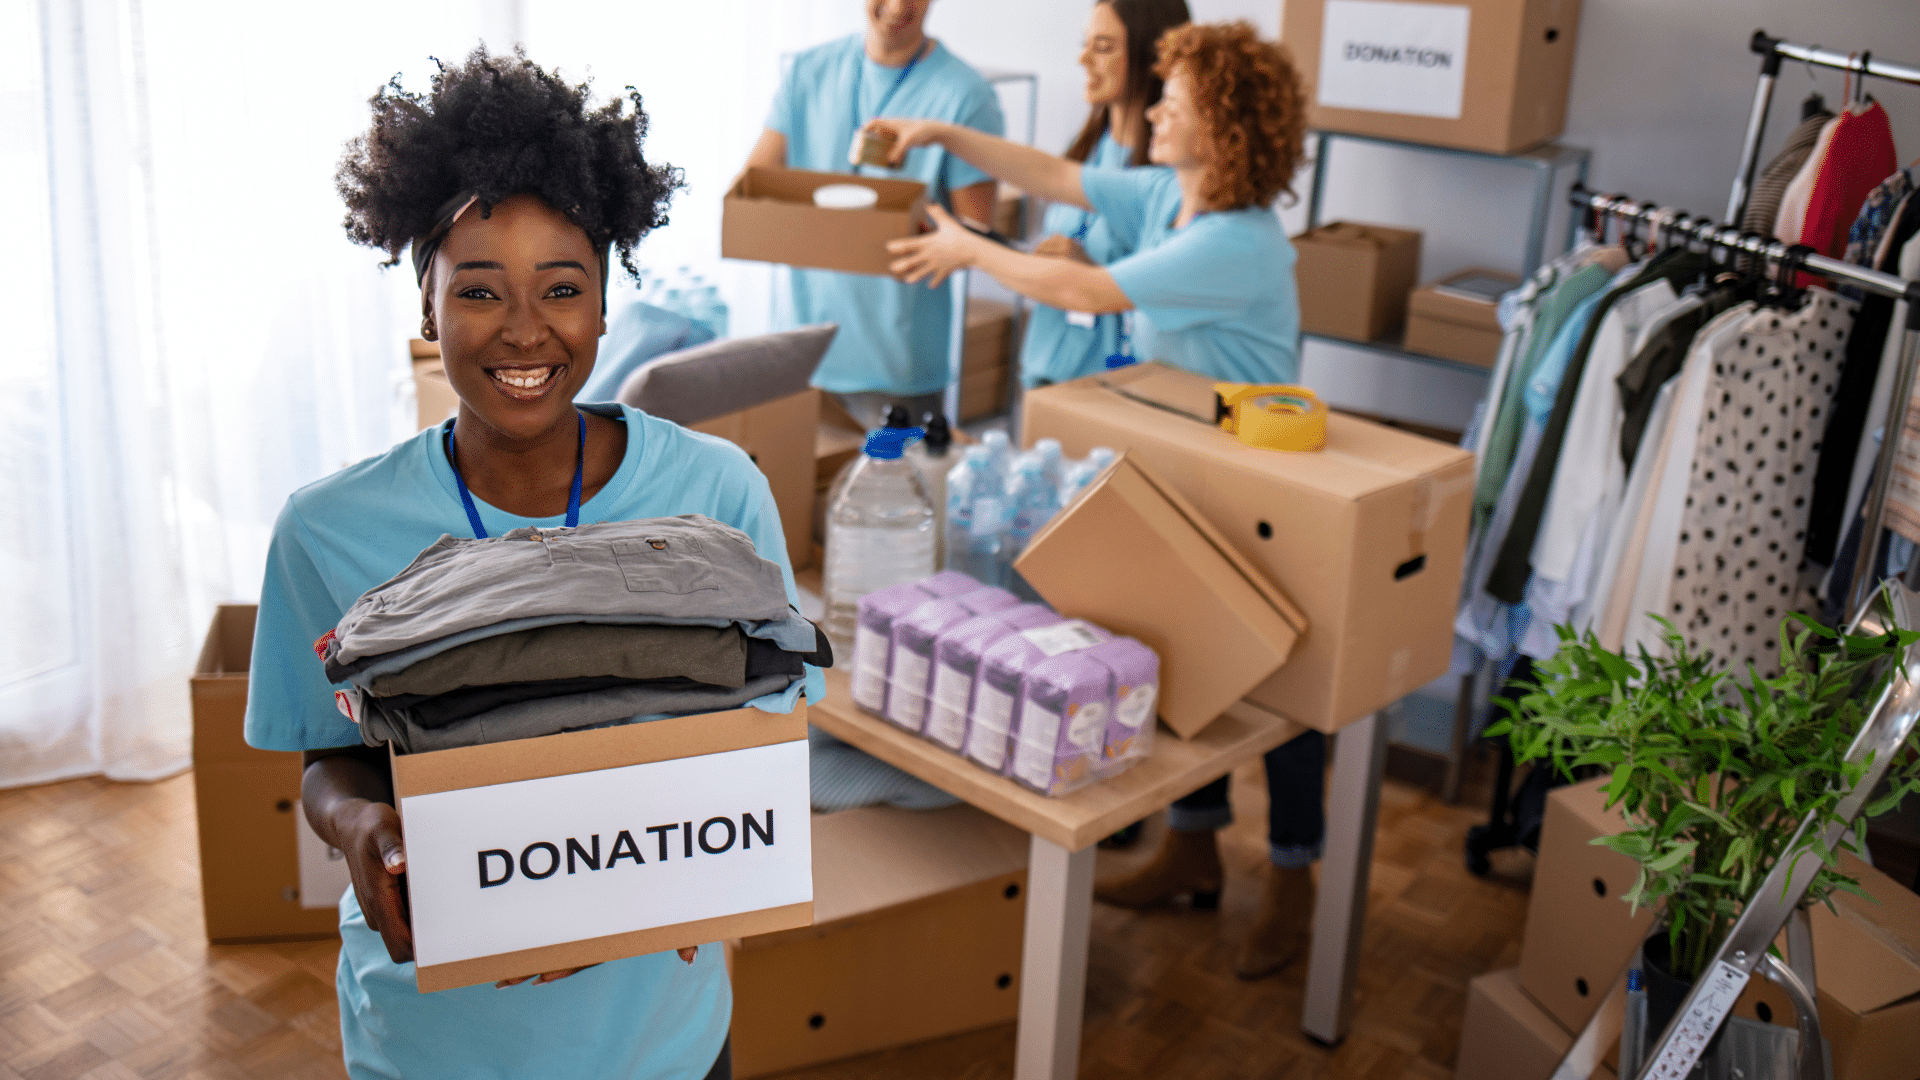 A Not-For-Profit (NPO) worker onsite at their local donation centre in London.